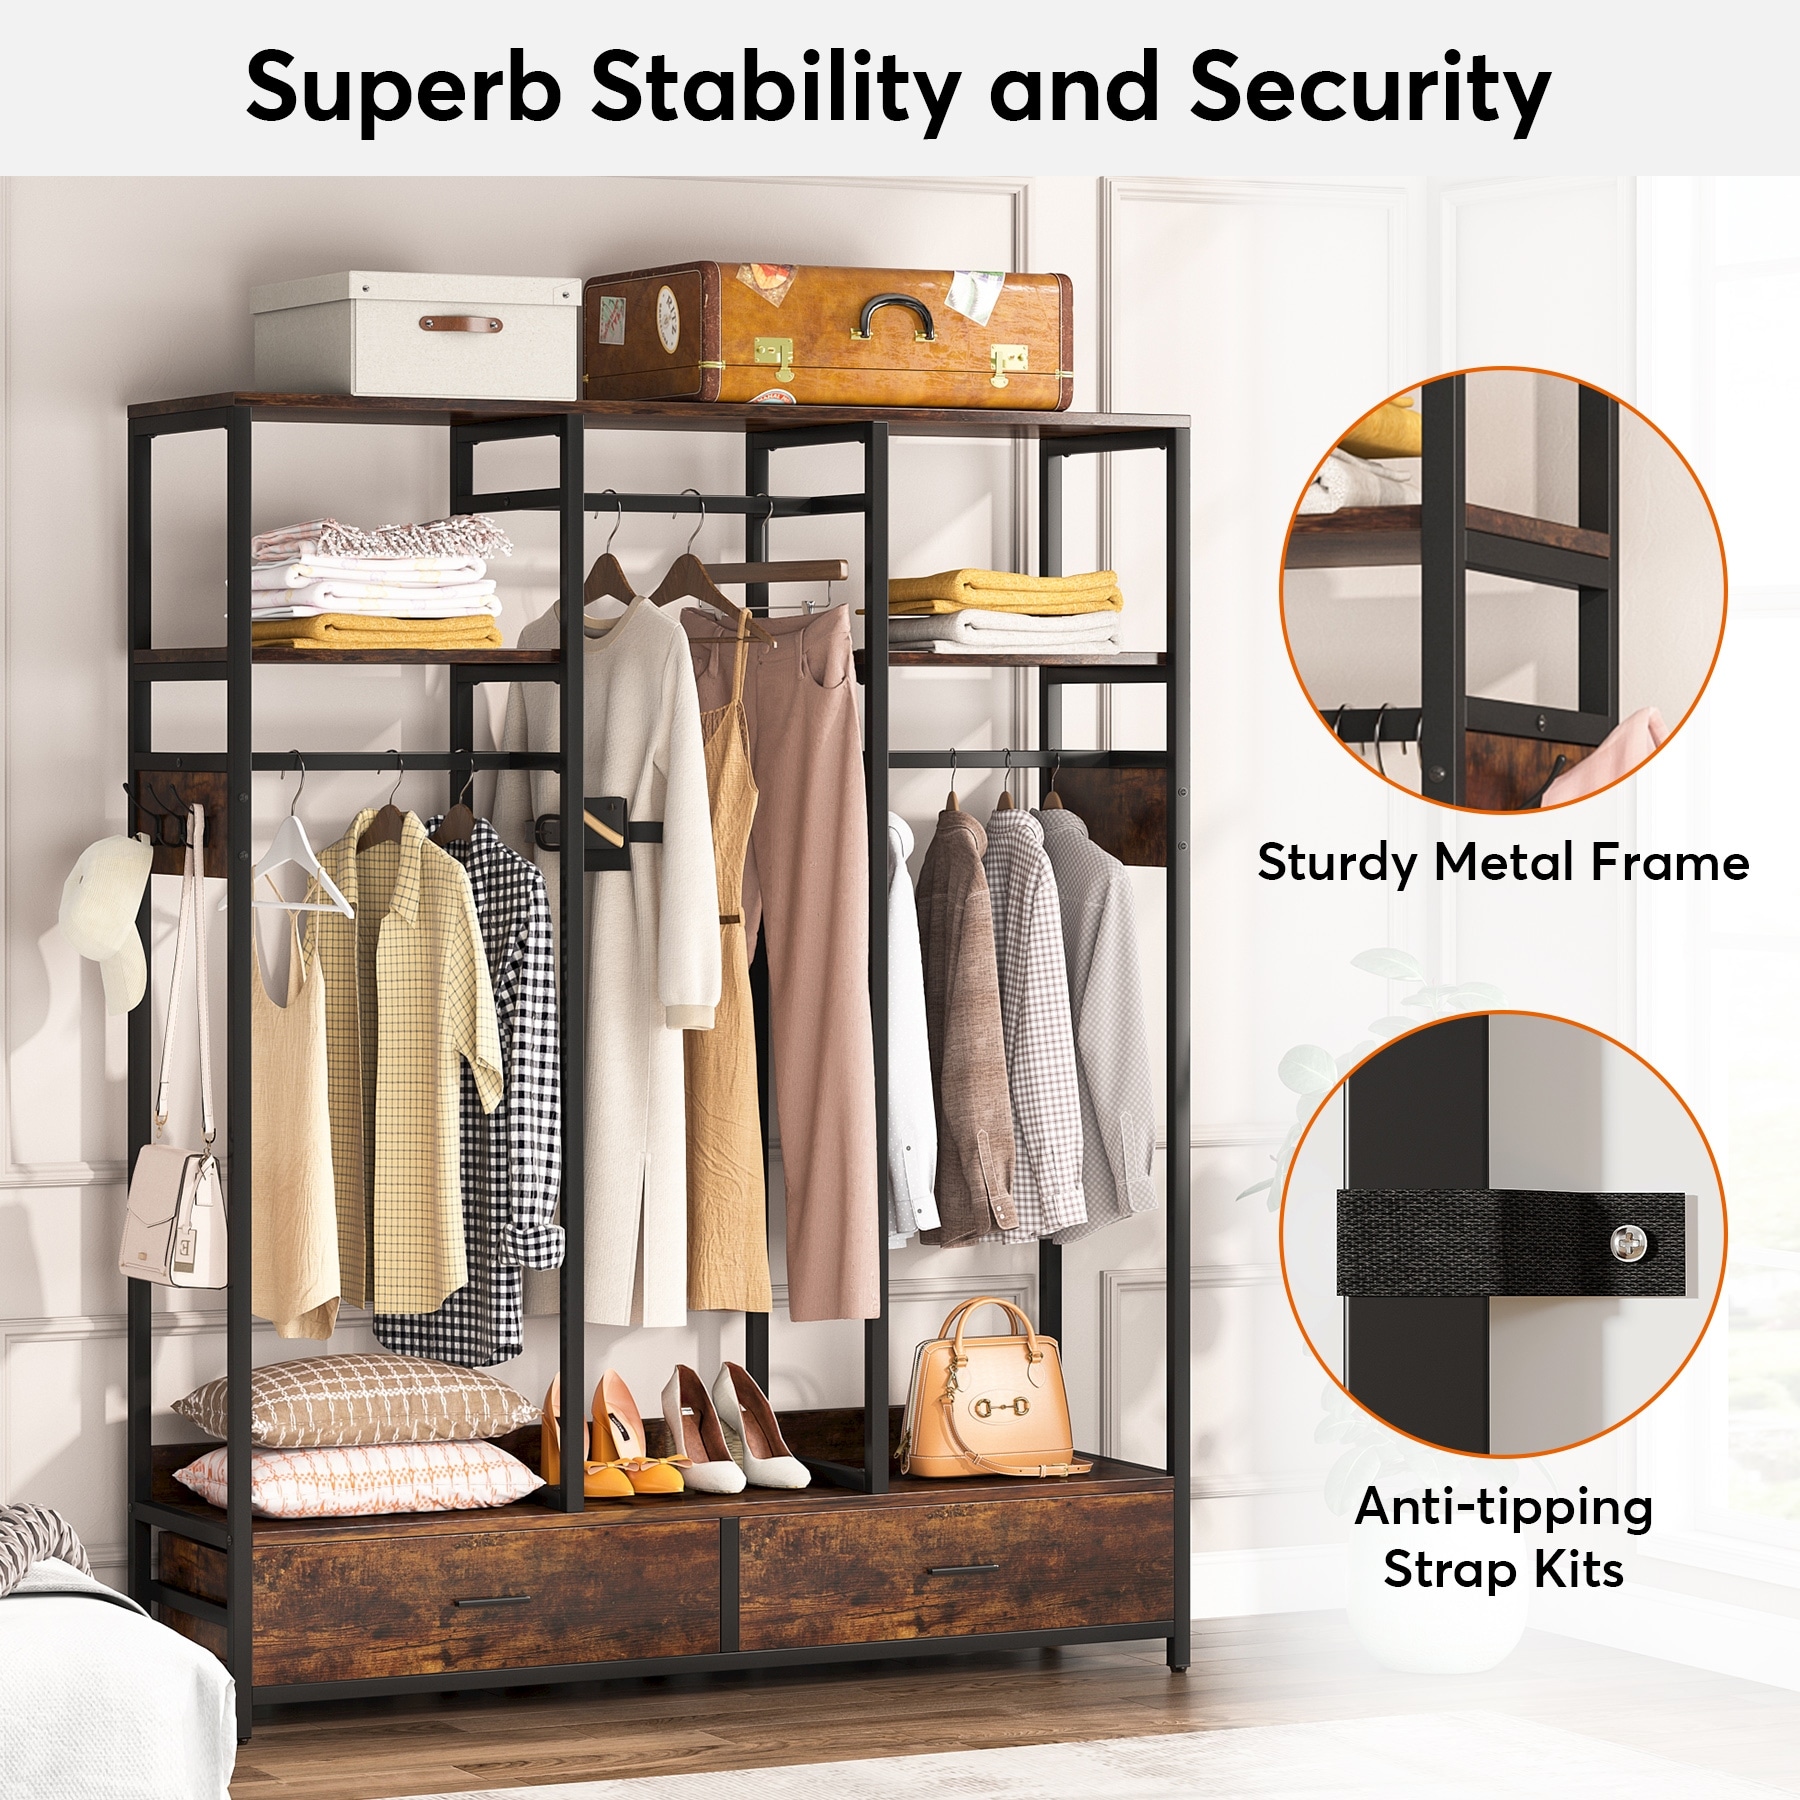 Extra Large Closet Organizer,Freestanding Garment Rack with Shelves and  Hanging Rods - On Sale - Bed Bath & Beyond - 34028430